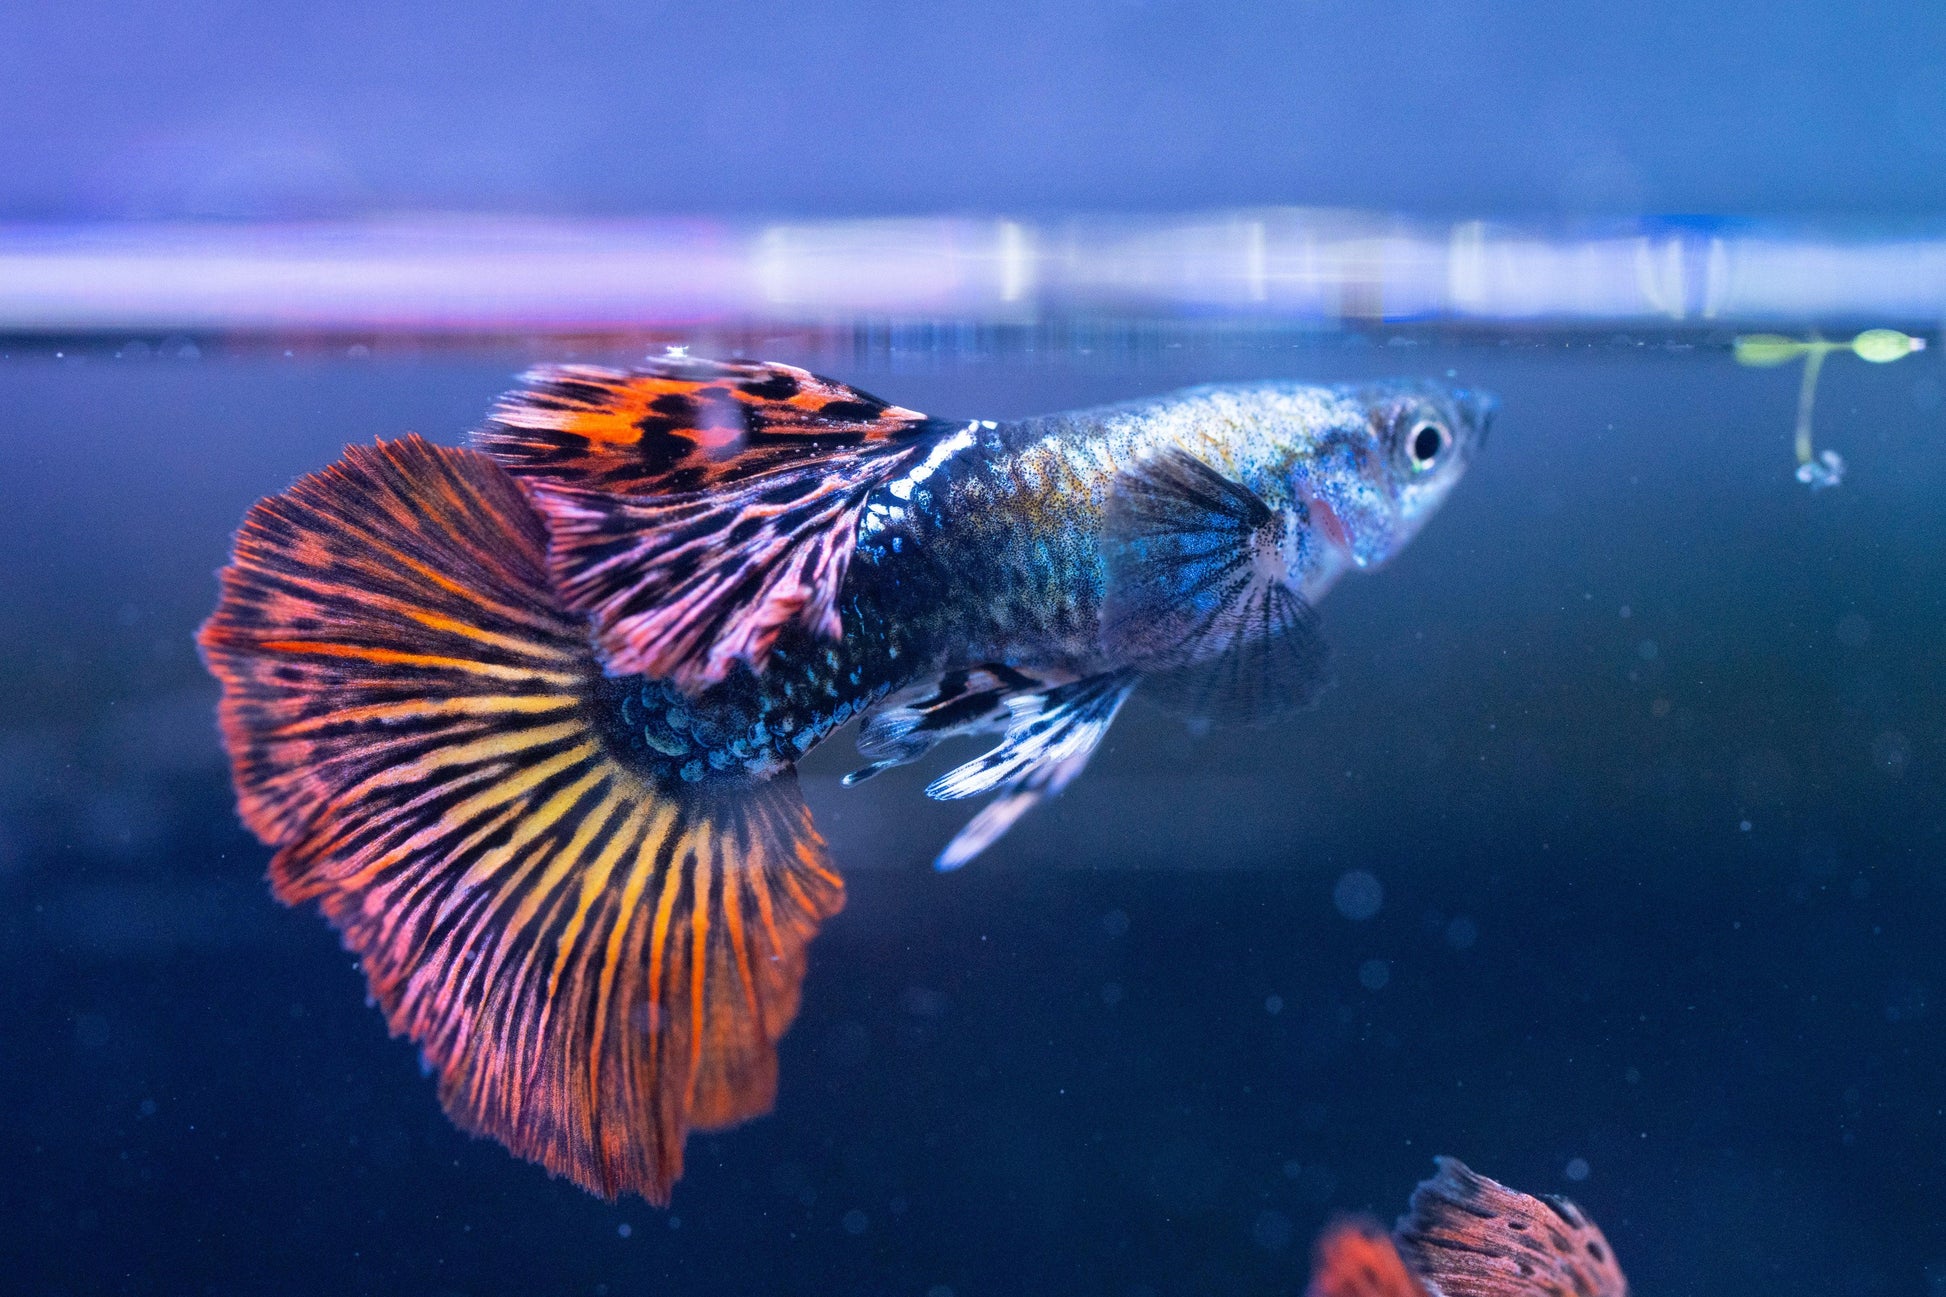 Tropicflow | Red Dragon Guppy For Sale